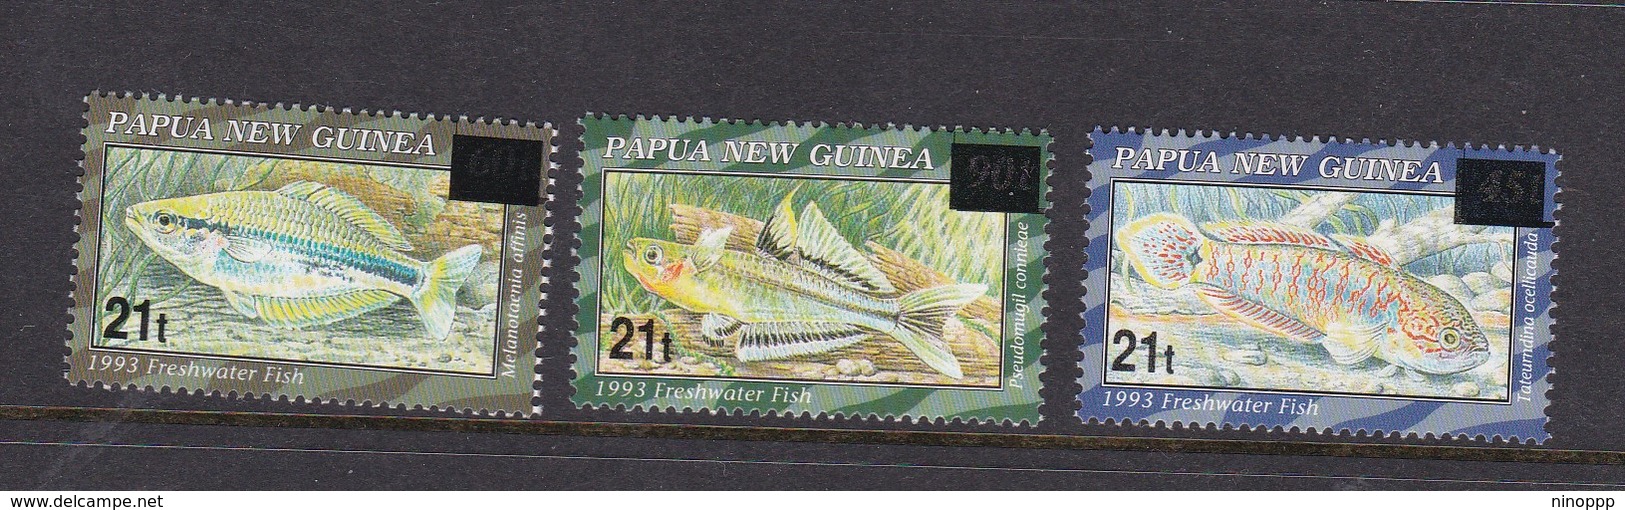 Papua New Guinea SG 759-761 1995 Overprinted Fishws Mint Never Hinged - Papouasie-Nouvelle-Guinée